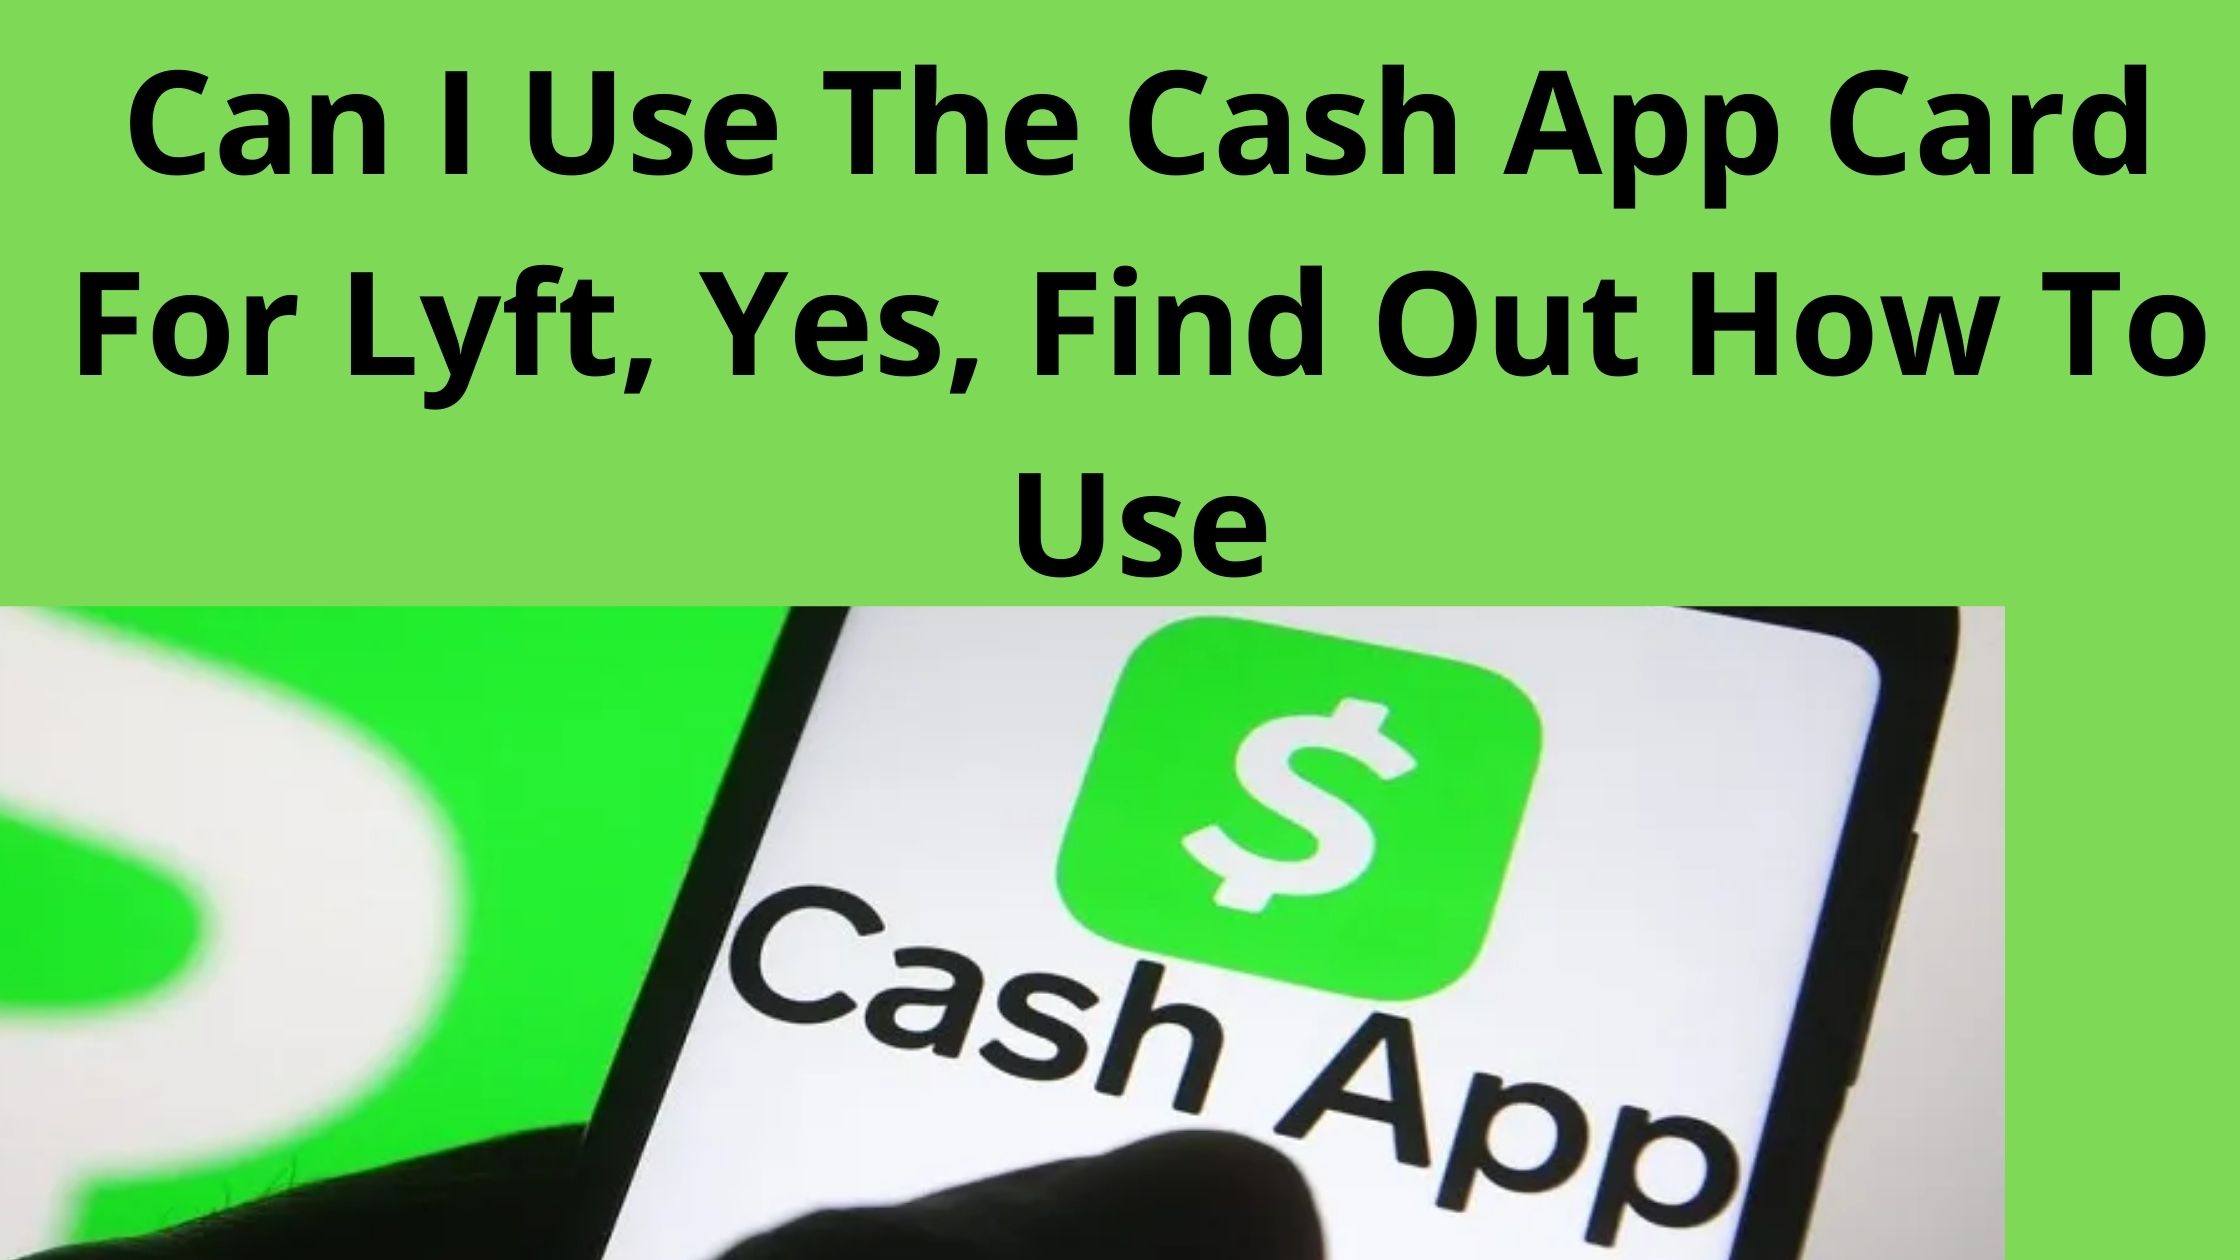 Can I Use The Cash App Card For Lyft, Yes, Find Out How To Use